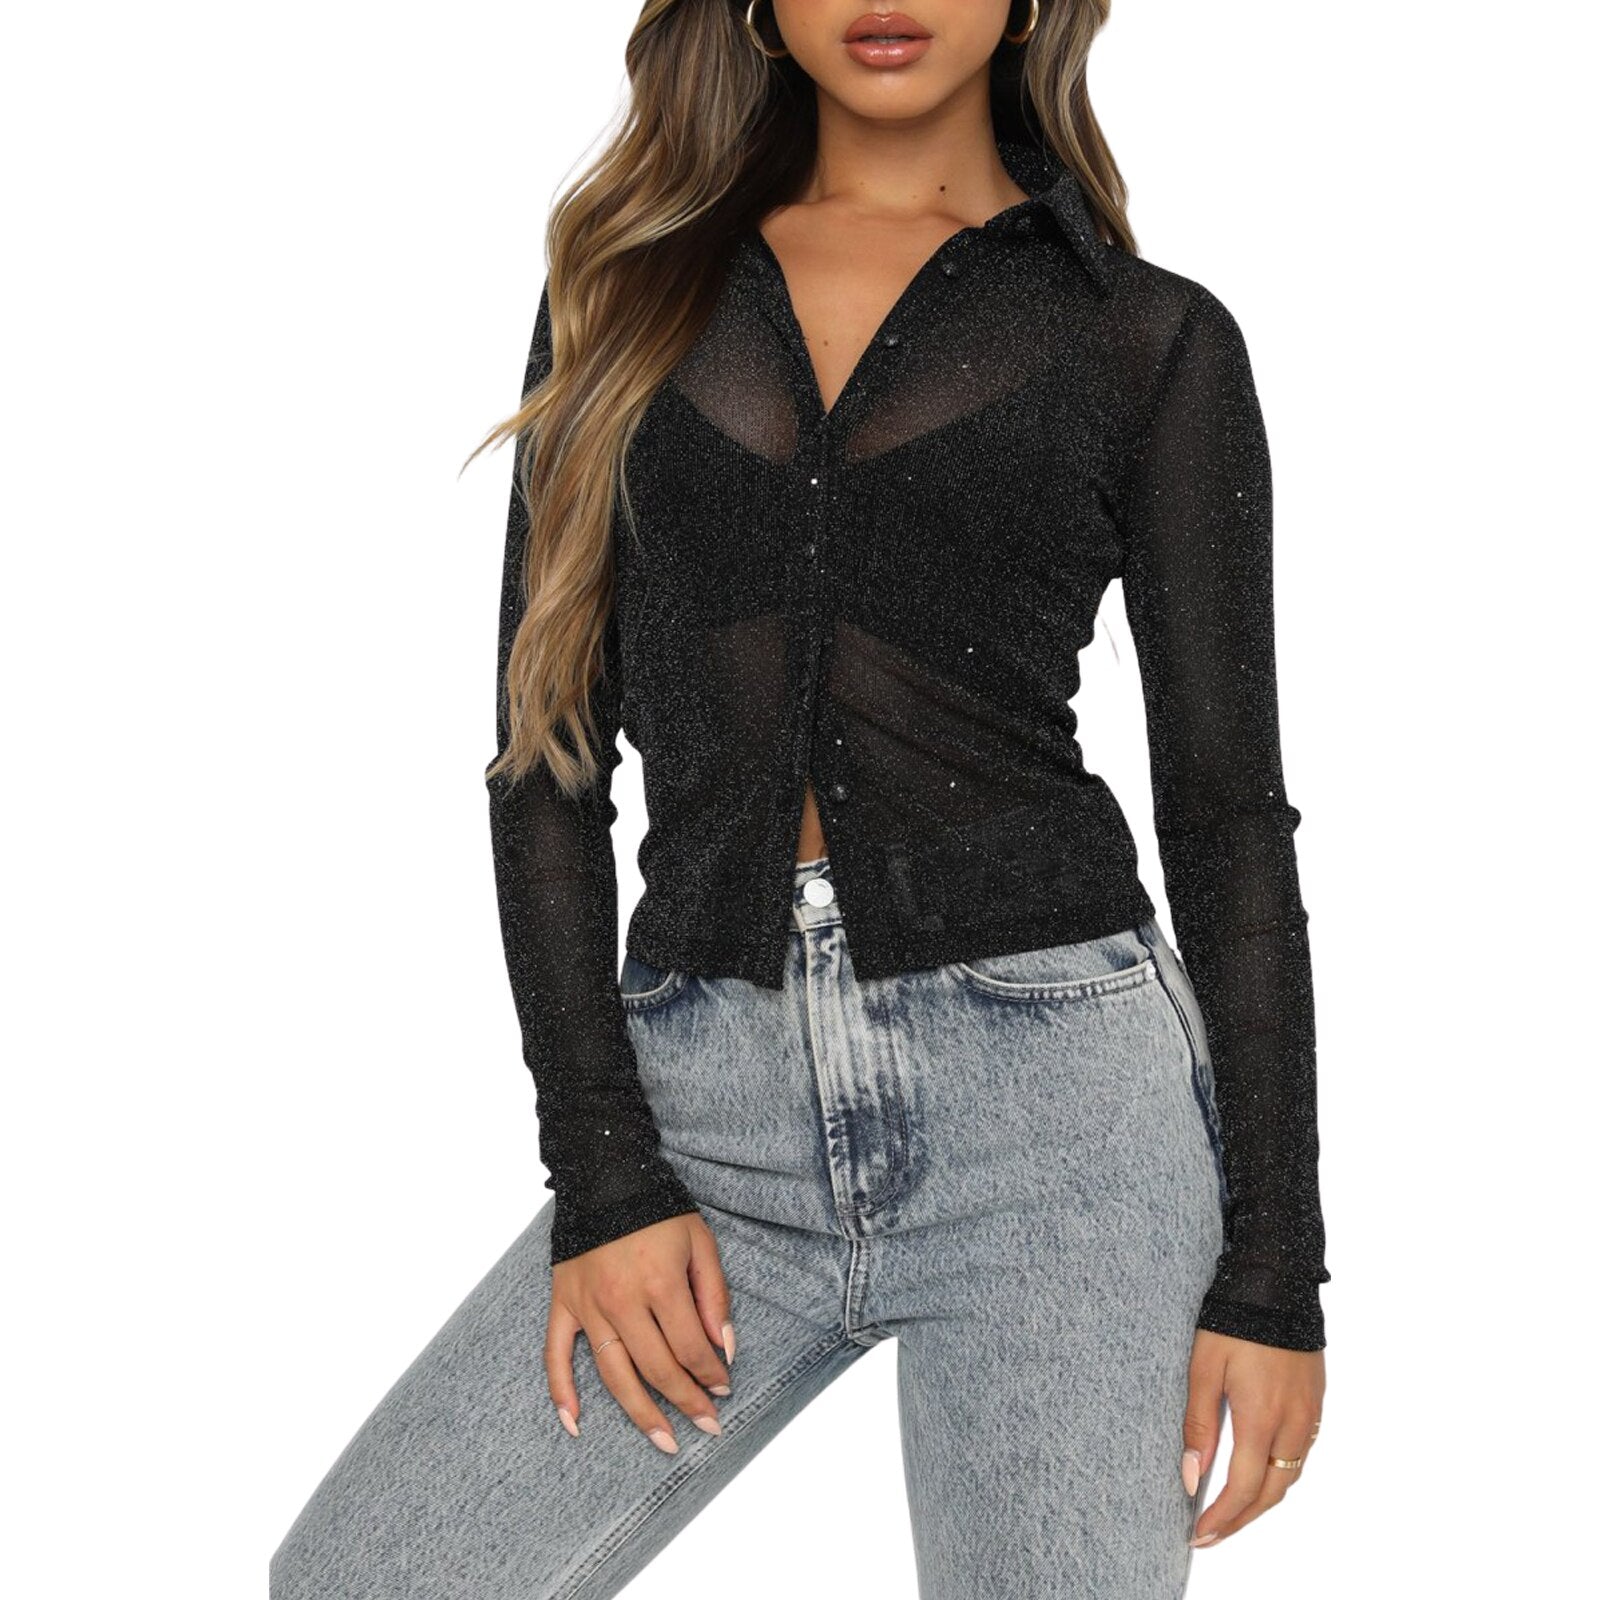 Prettyswomen Y2K Female Shirt Solid Color Turn-Down Collar Long Sleeve Tops See-Through Blouse For Adults Women Black Brown 2022